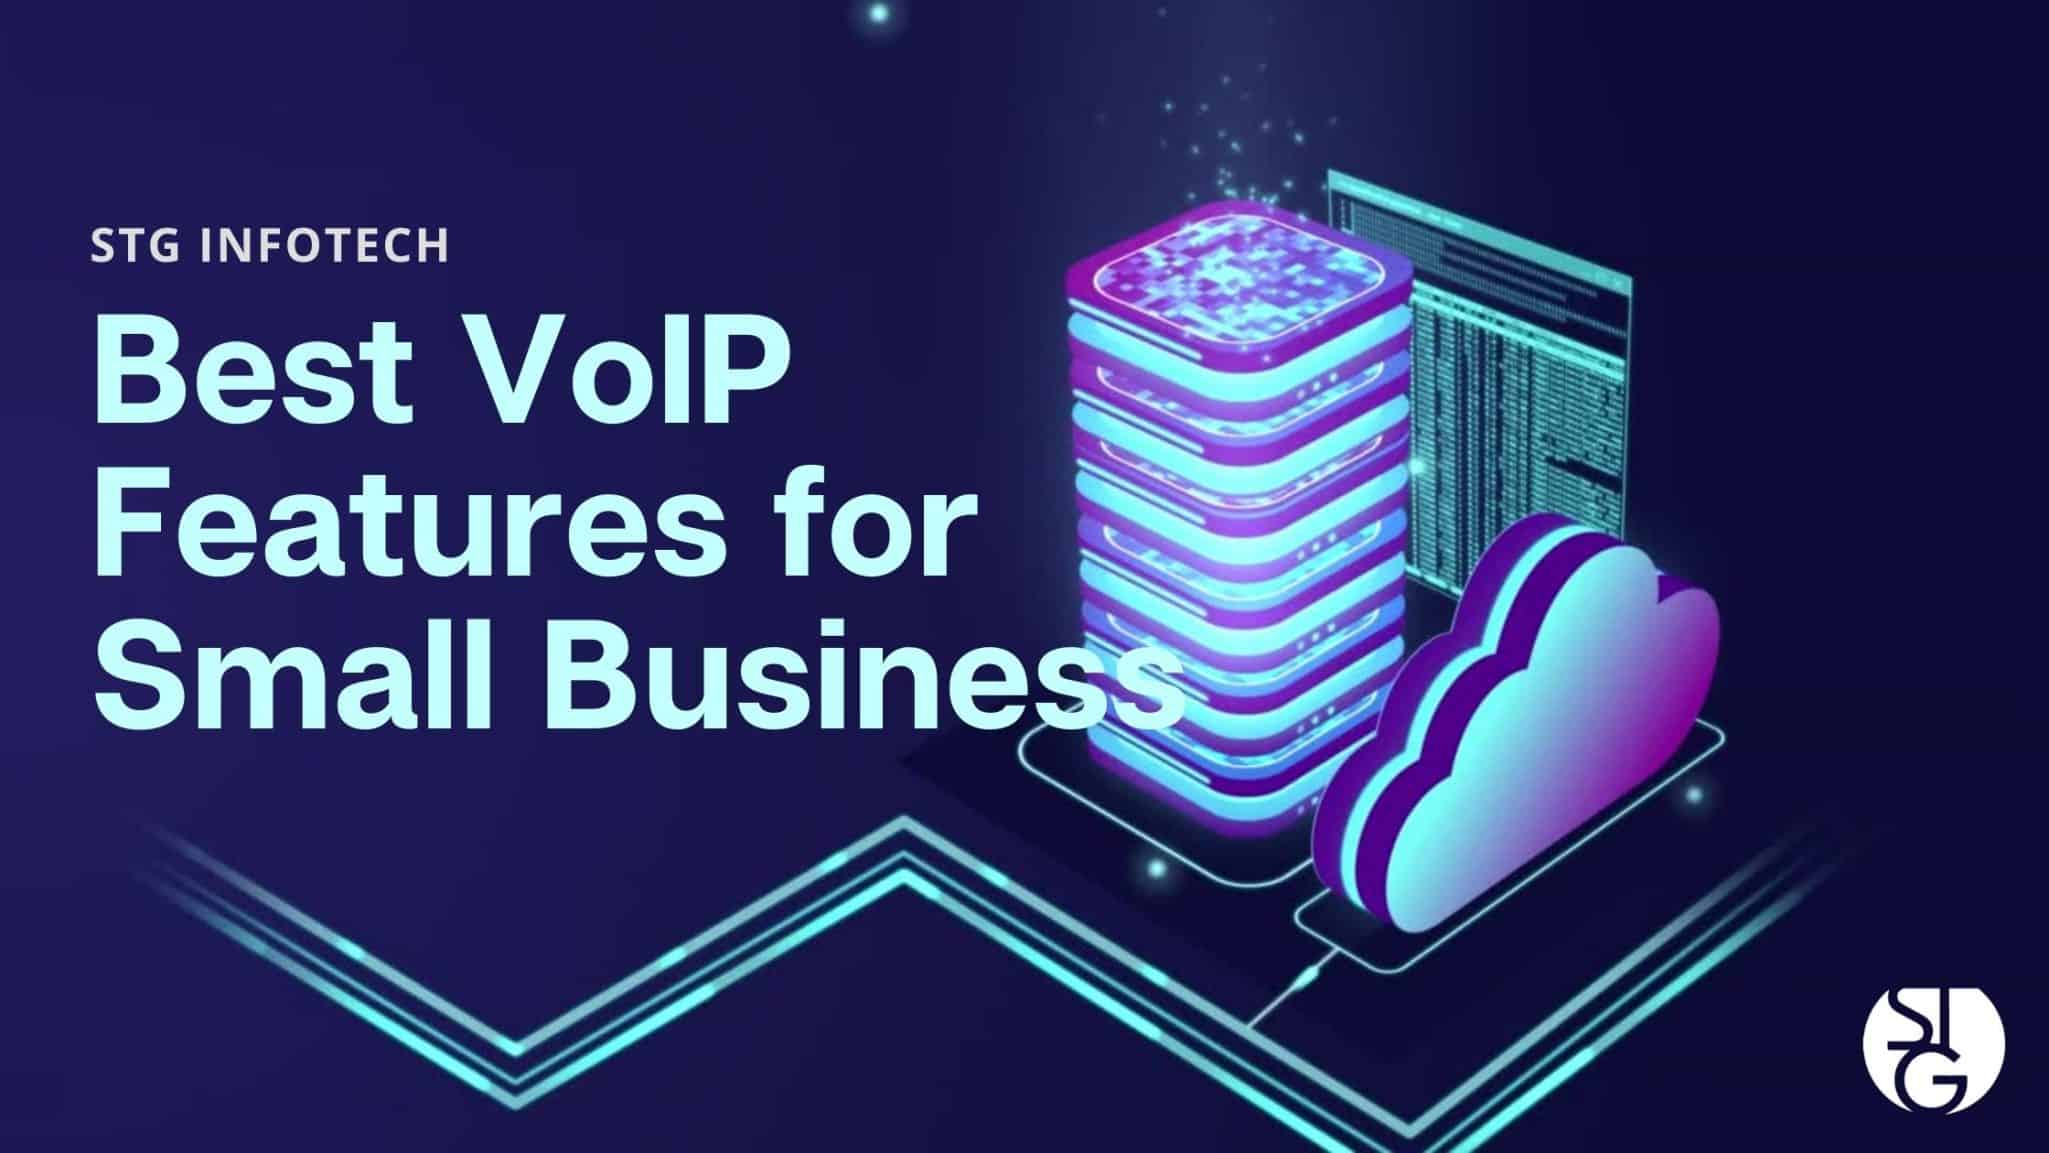 What VoIP Features Are Most Beneficial for Small Businesses